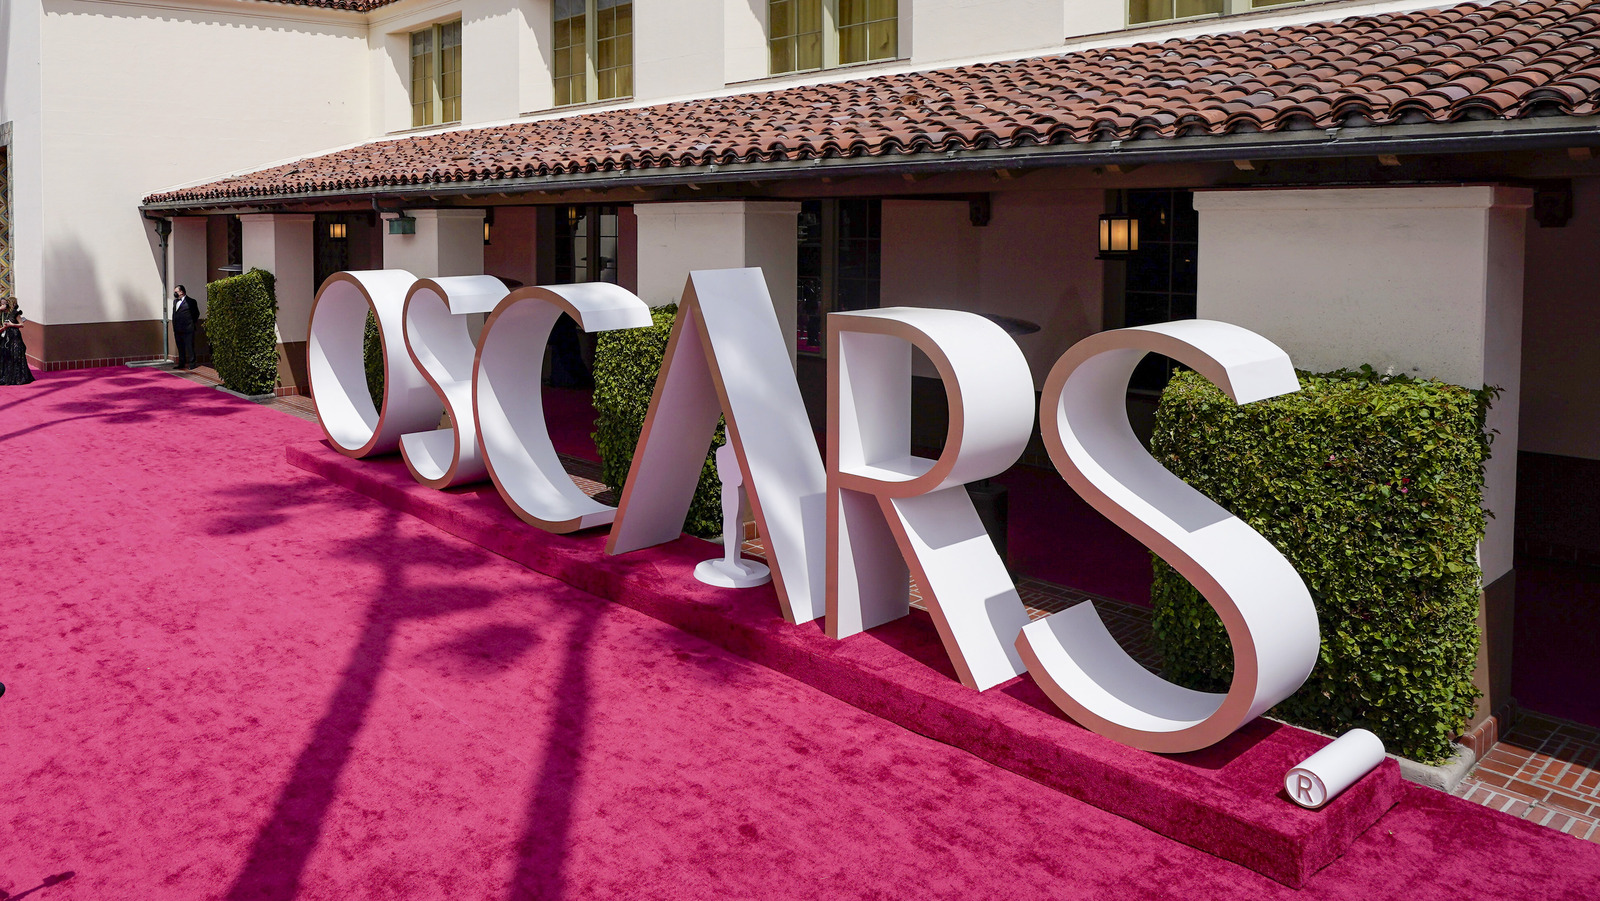 Why This Year's Oscars Location Has Twitter Seeing Red